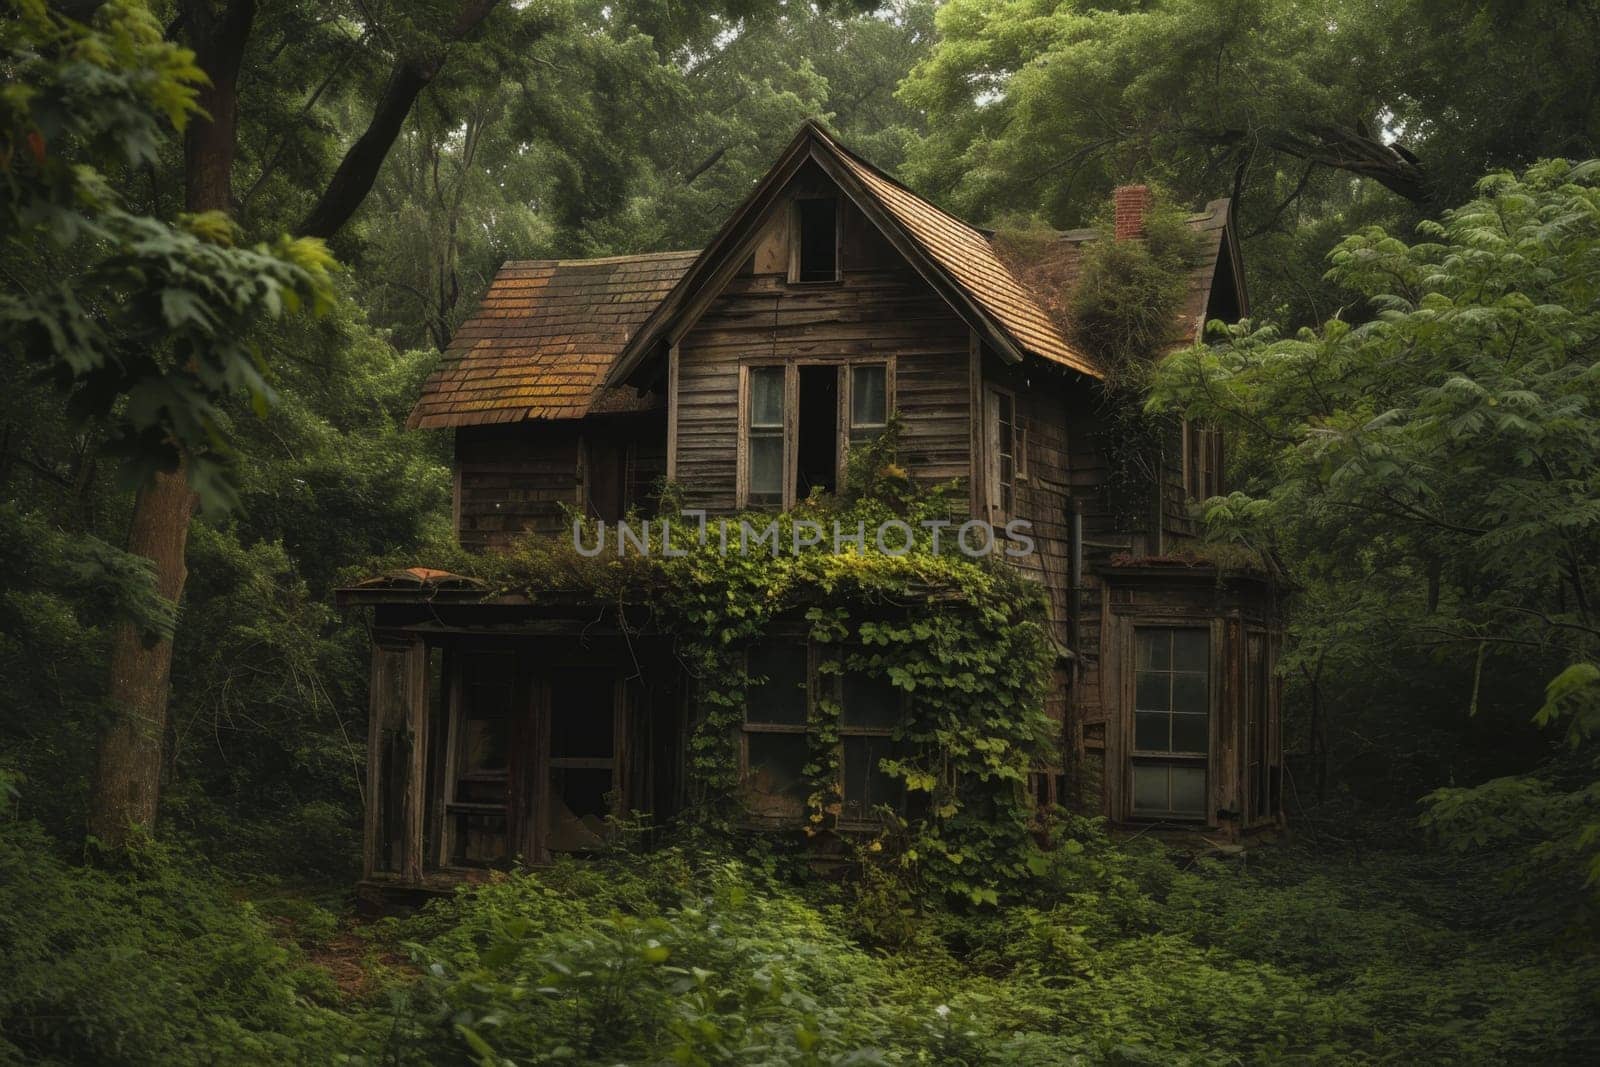 An old gloomy lost house in the woods in the wilderness.